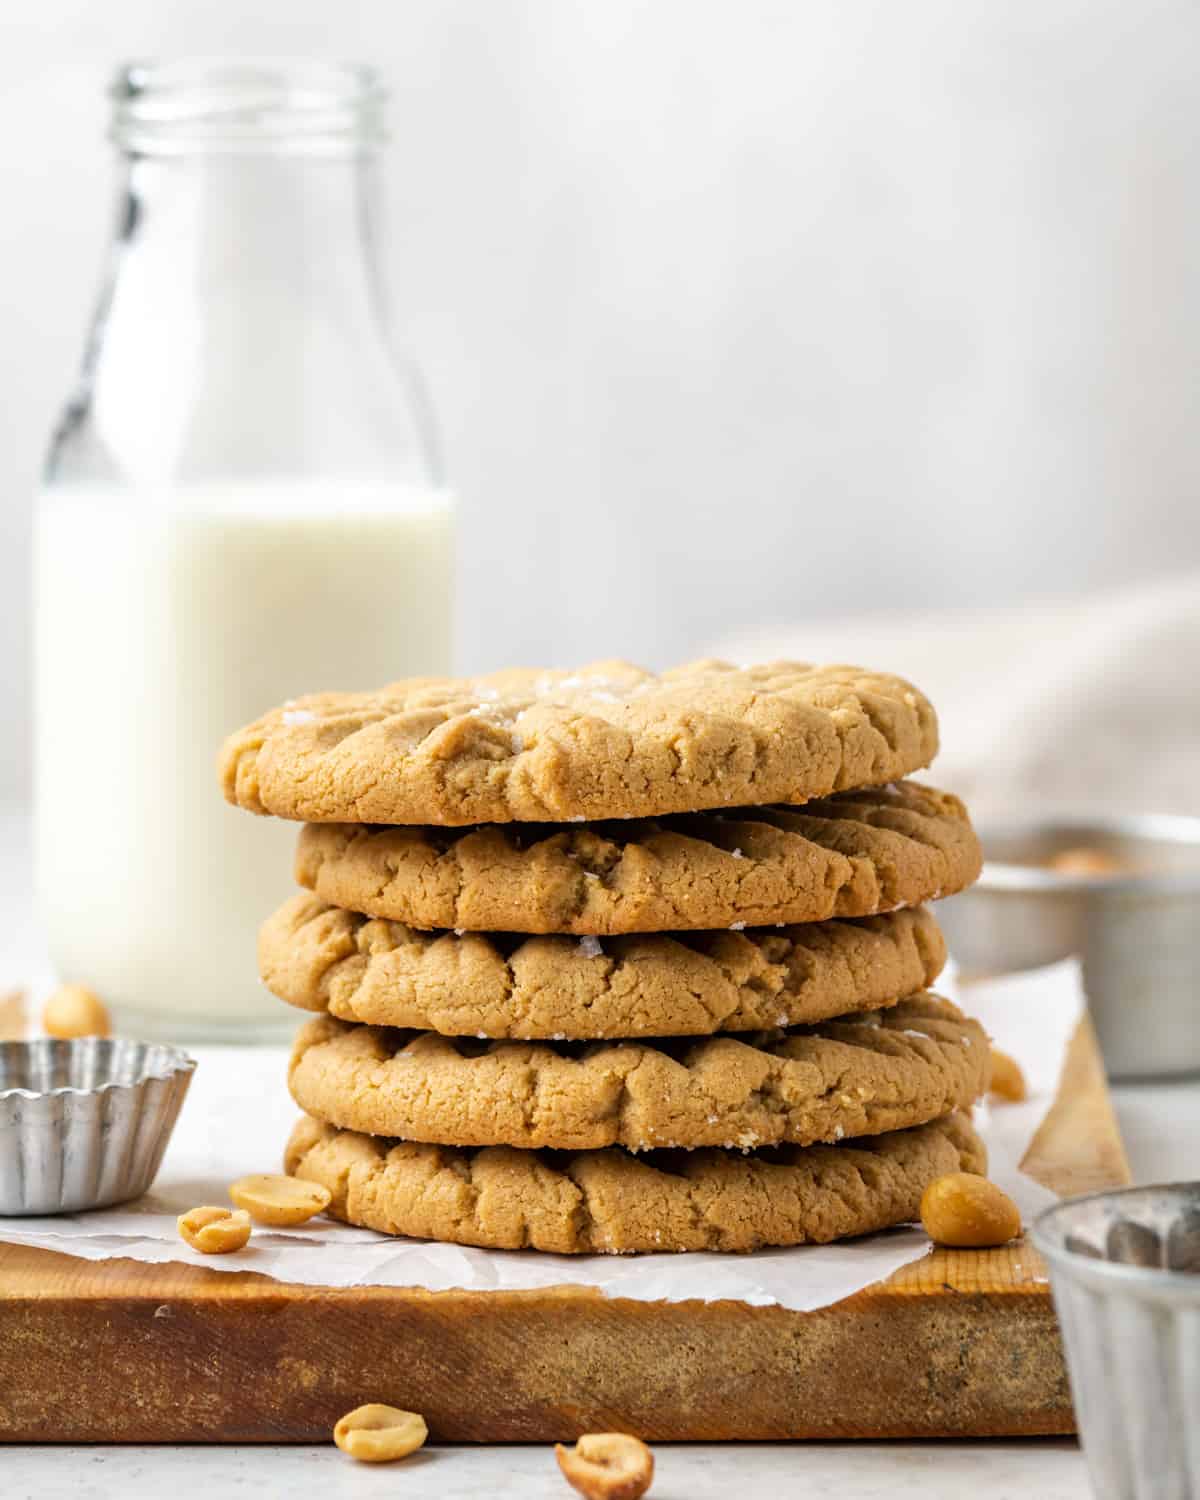 A stack of five gluten free peanut butter cookies sitting on a wooden cutting board.